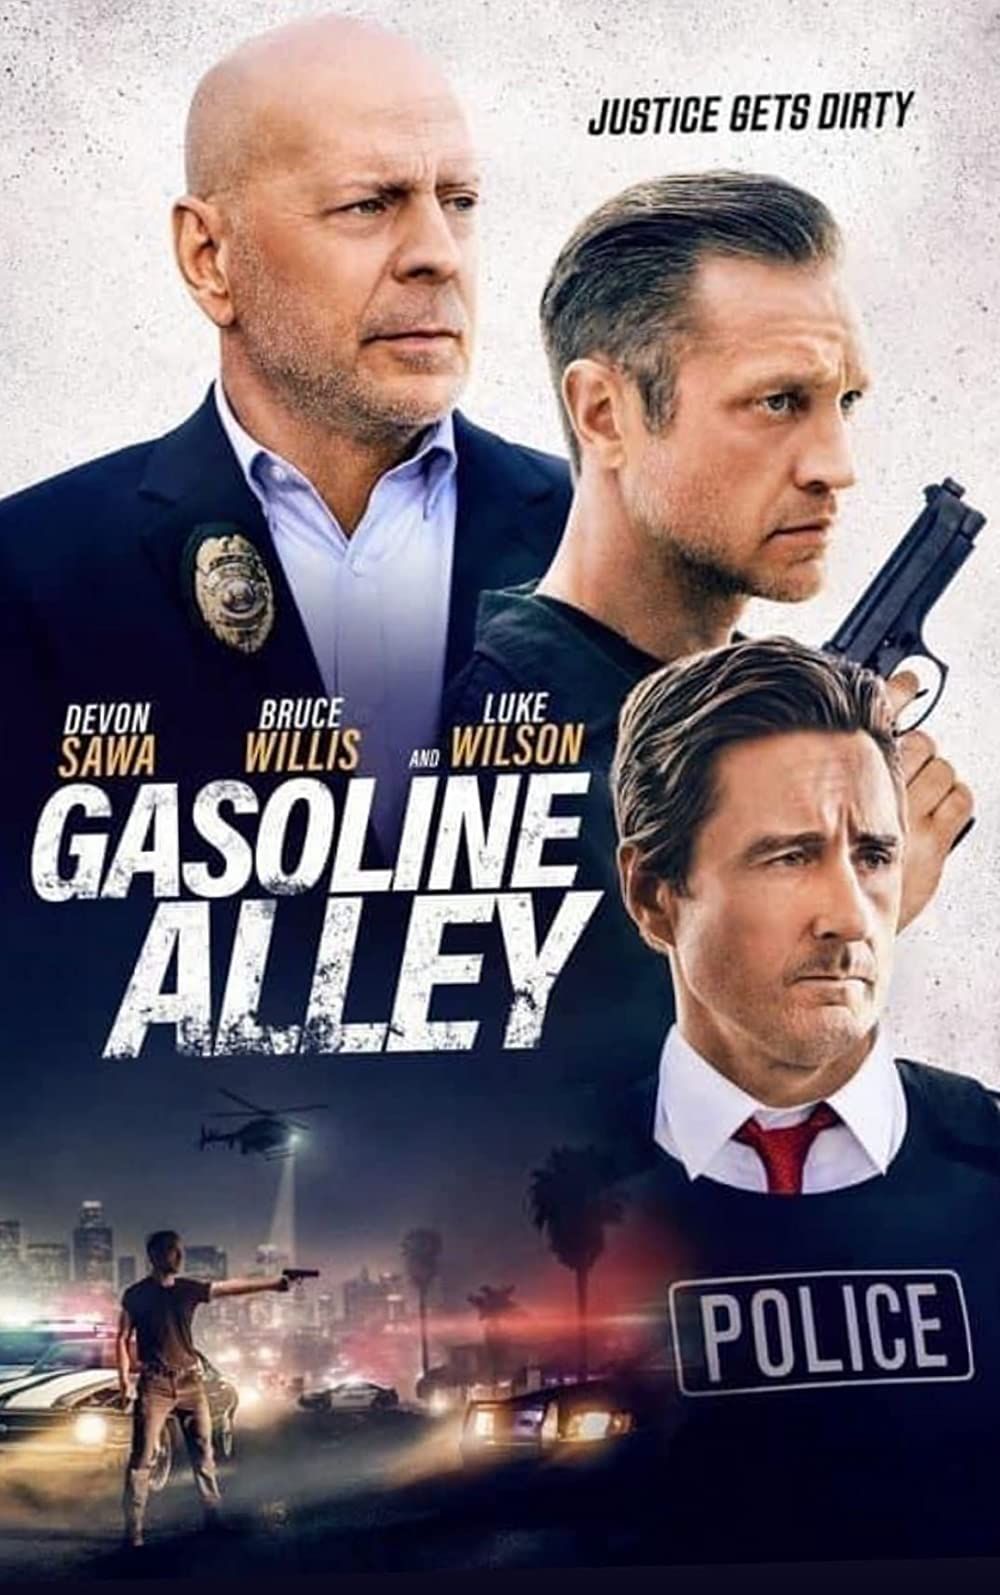 Gasoline Alley (2022) Hindi Dubbed BluRay download full movie